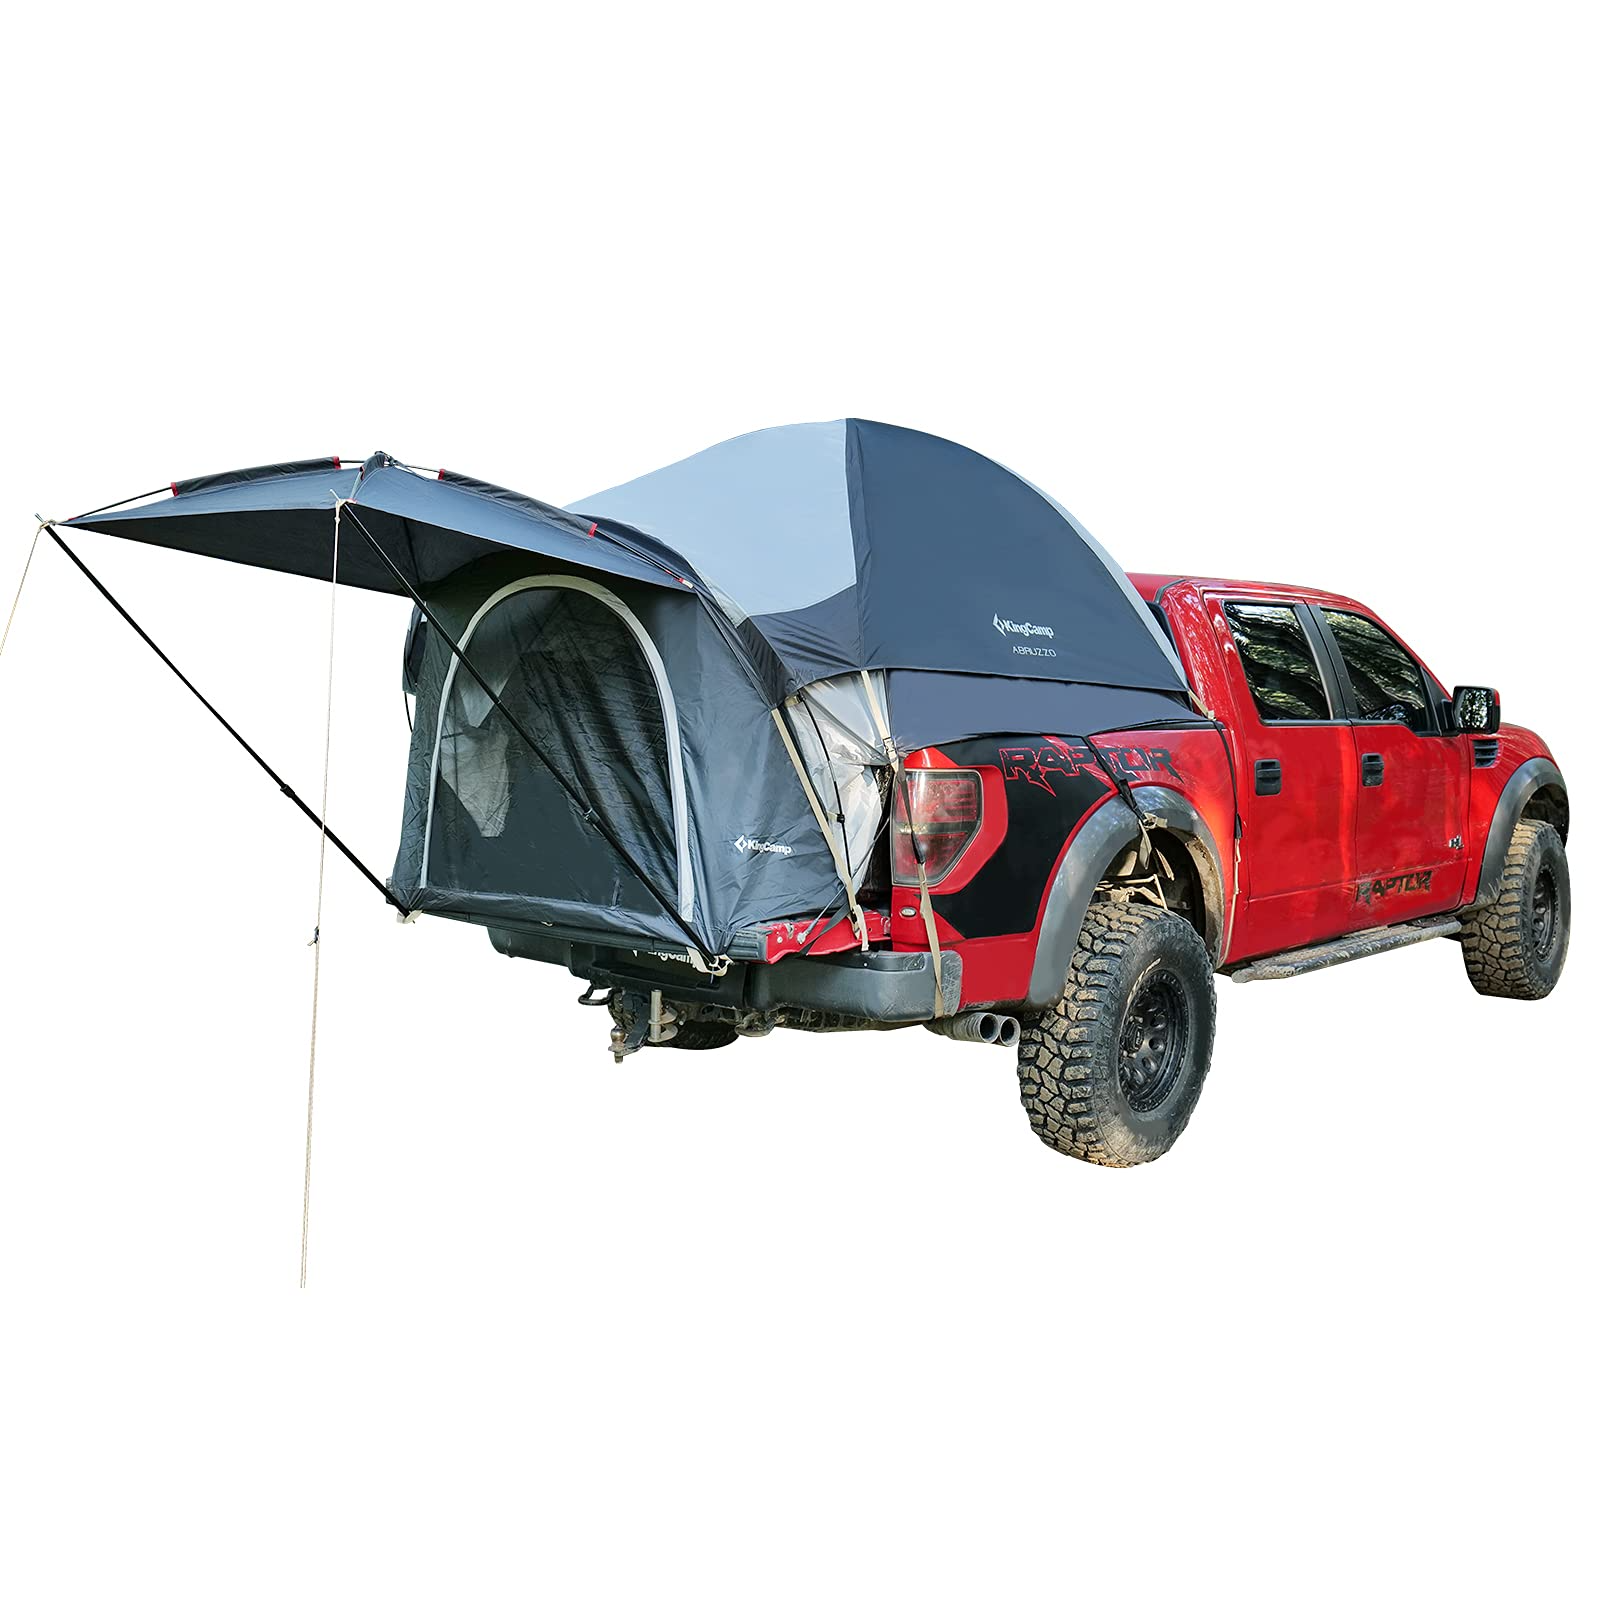 Coastrail Outdoor Pickup Truck Bed Tent with Rainfly, 5.5' Full